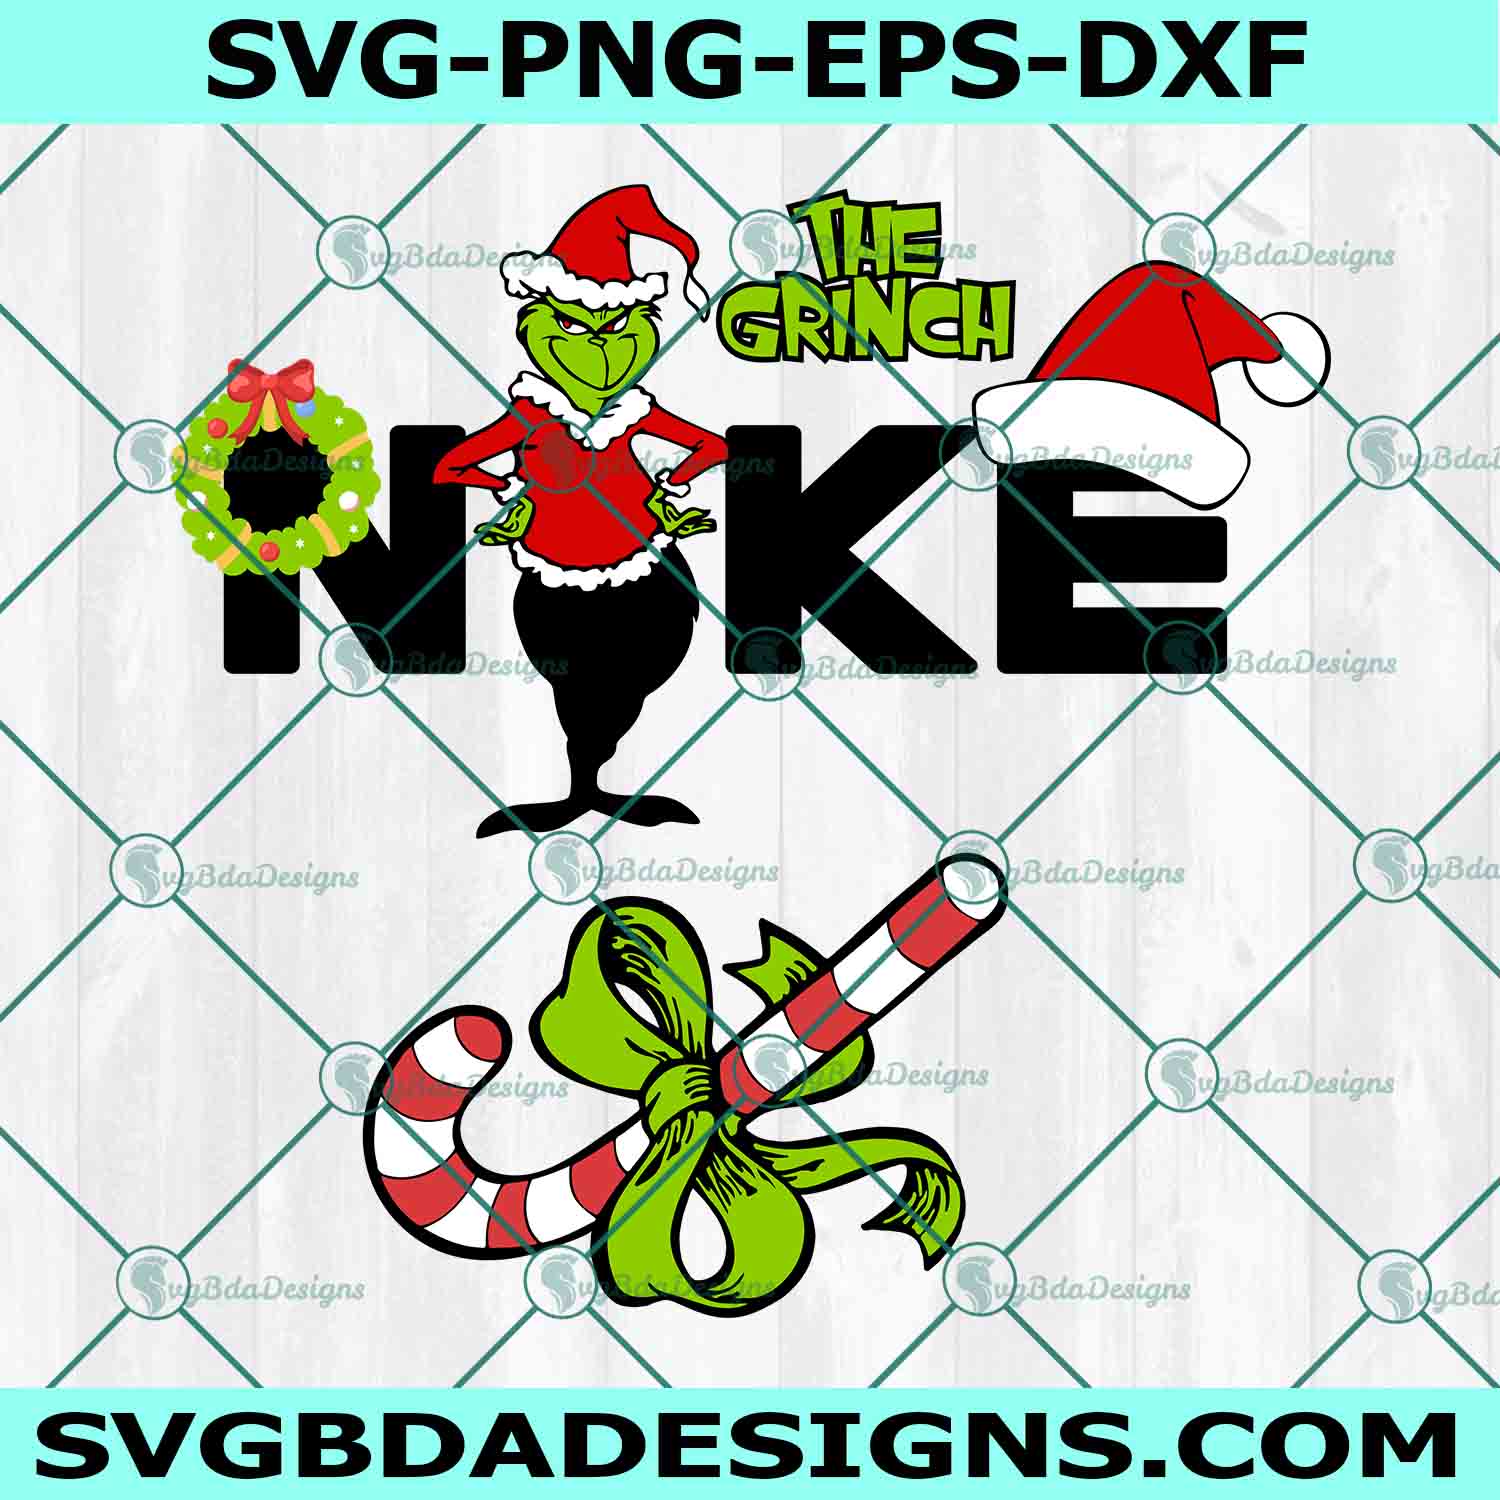 The Grinch x Nike Svg, Merry Christmas Svg, Nike x Grinch Christmas Svg, The Grinch Svg, Christmas Svg, File for Cricut